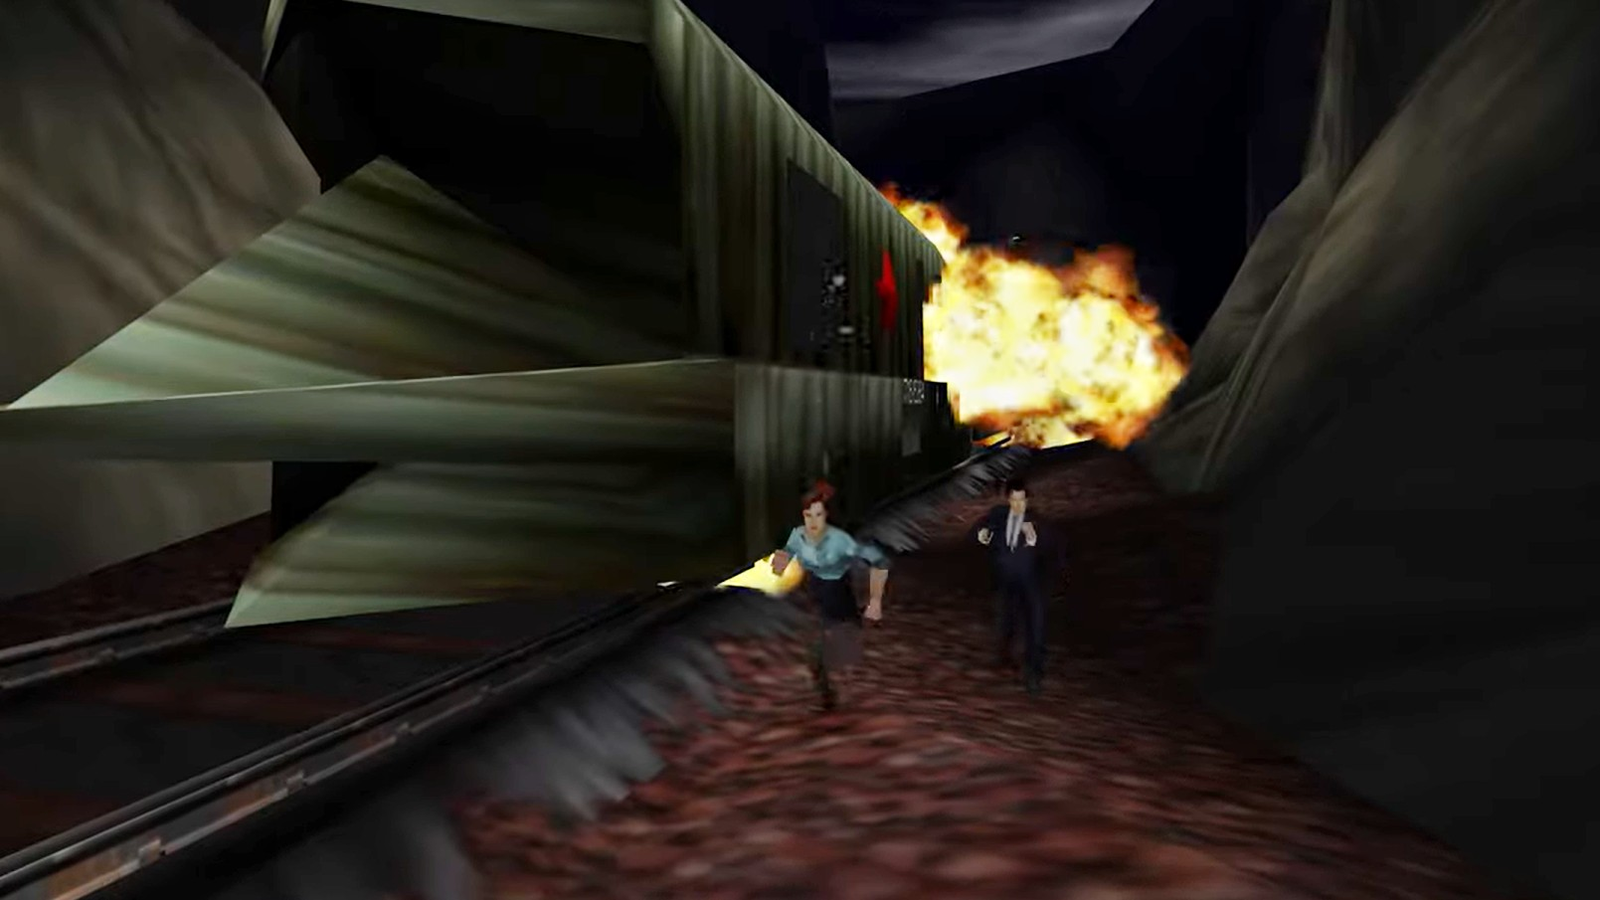 GoldenEye 007': how to play multiplayer on the Nintendo Switch